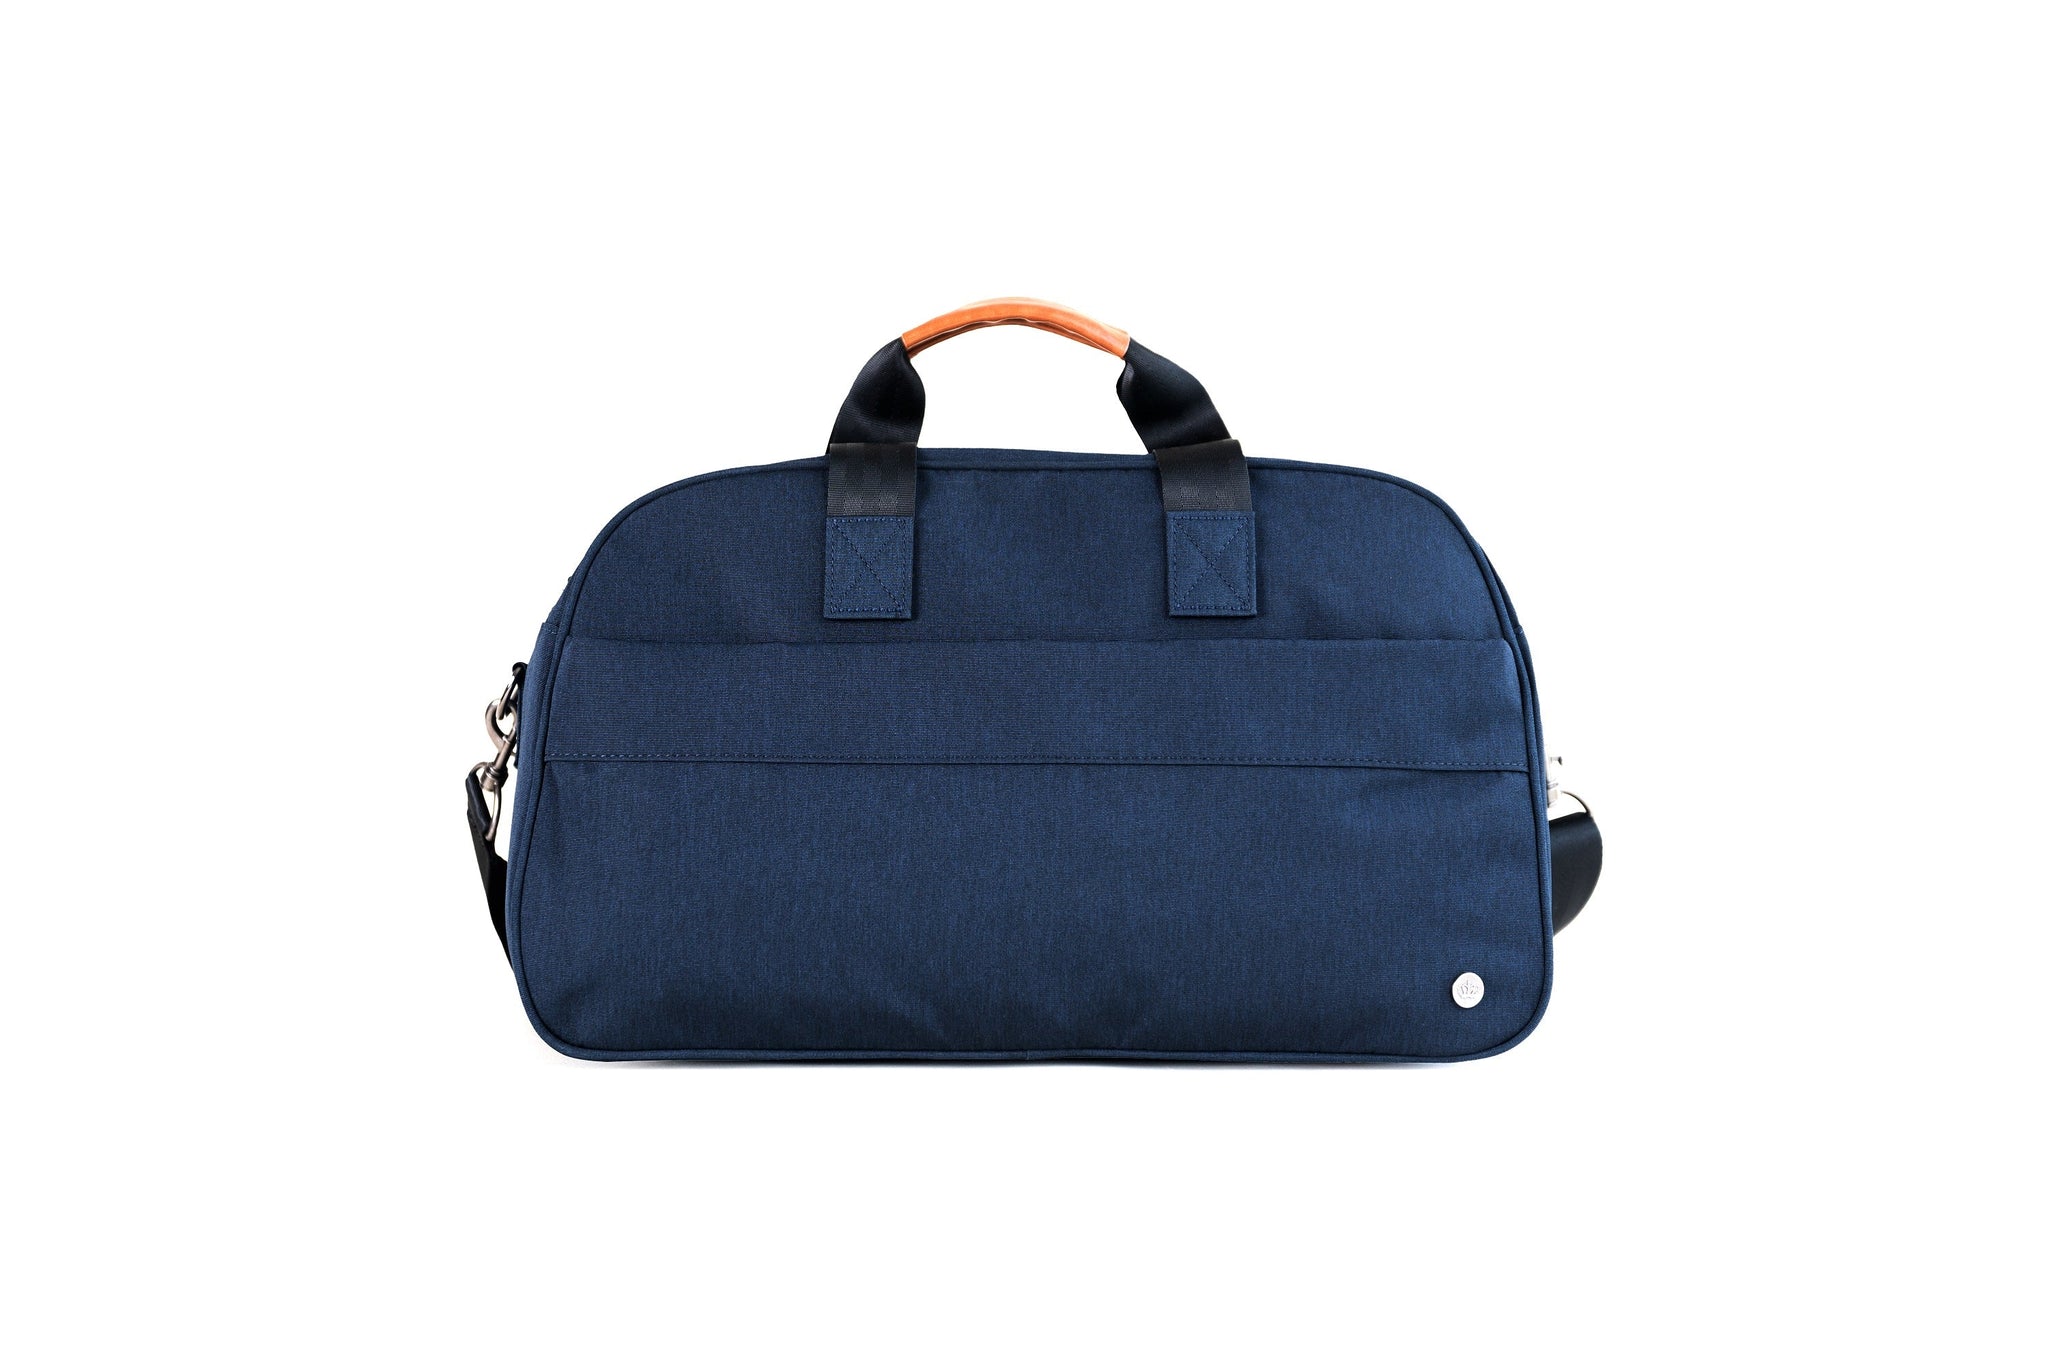 PKG Westmount 26L Recycled Duffle Bag by PKG Carry Goods